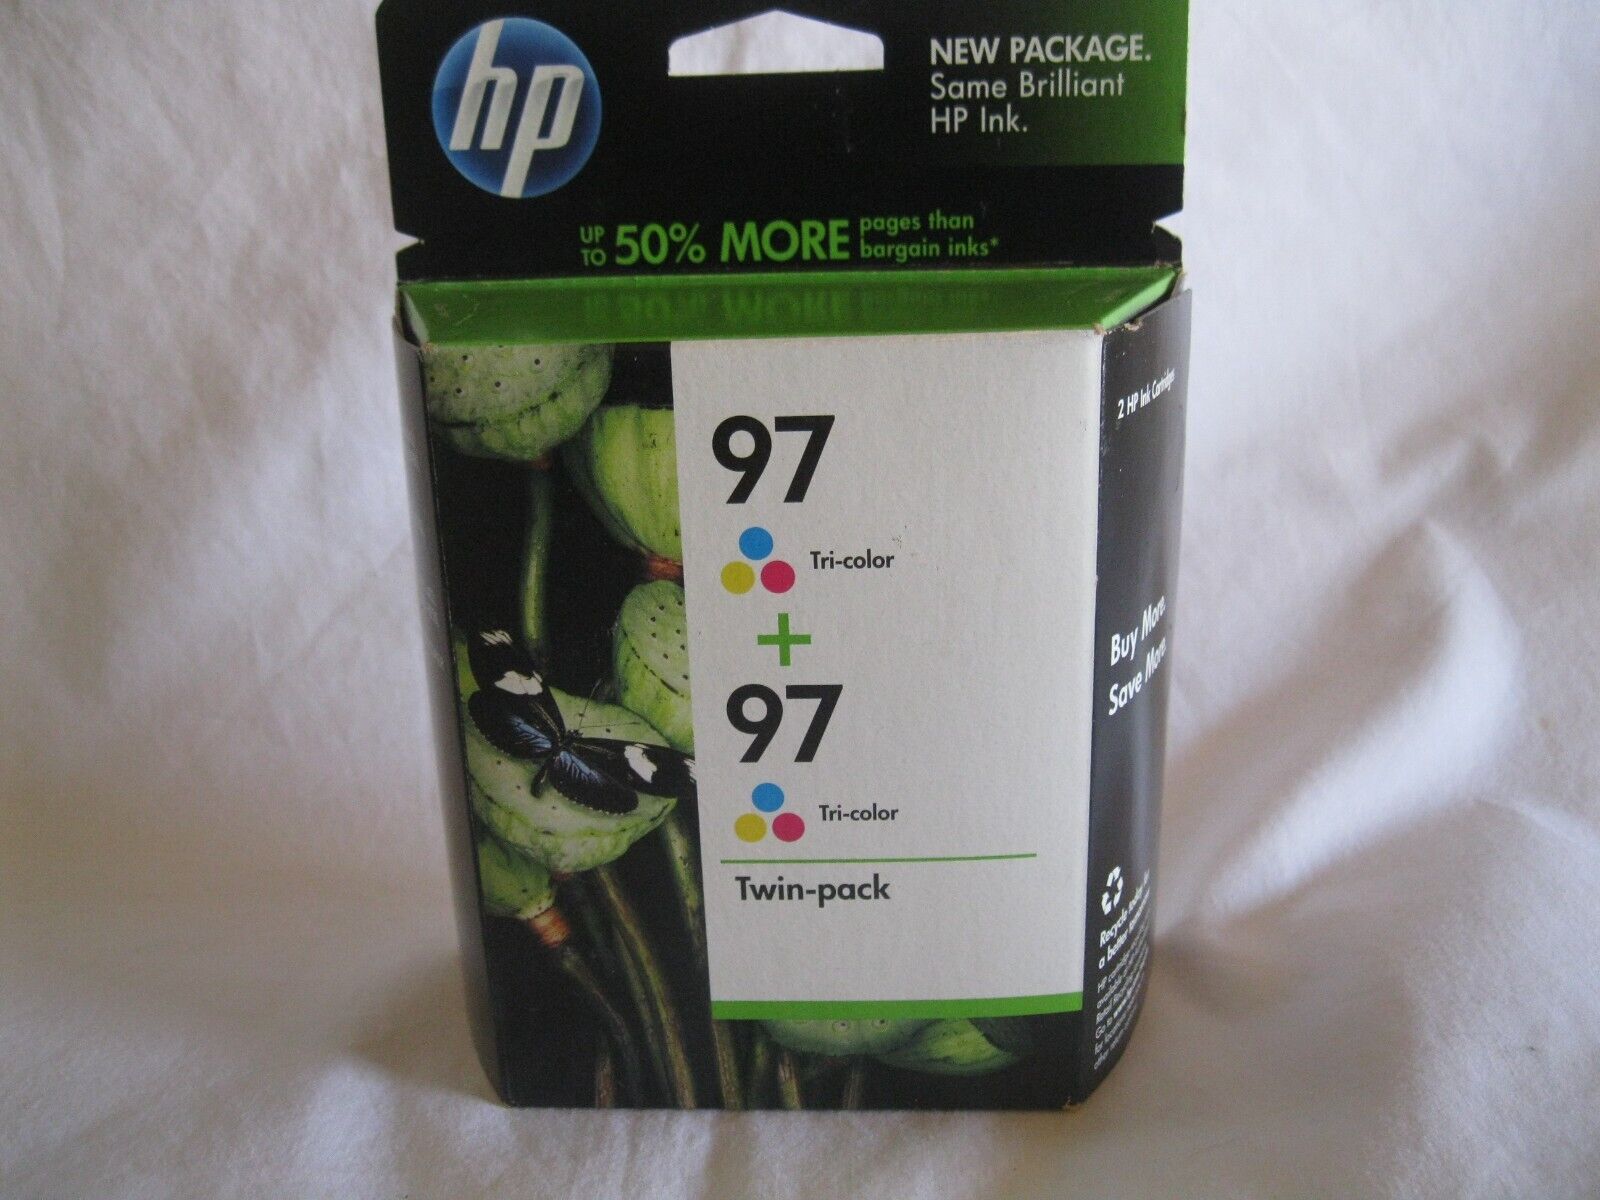 2 Pack New Sealed Genuine HP 97 Tri-color Ink Cartridges in Retail Box Expired